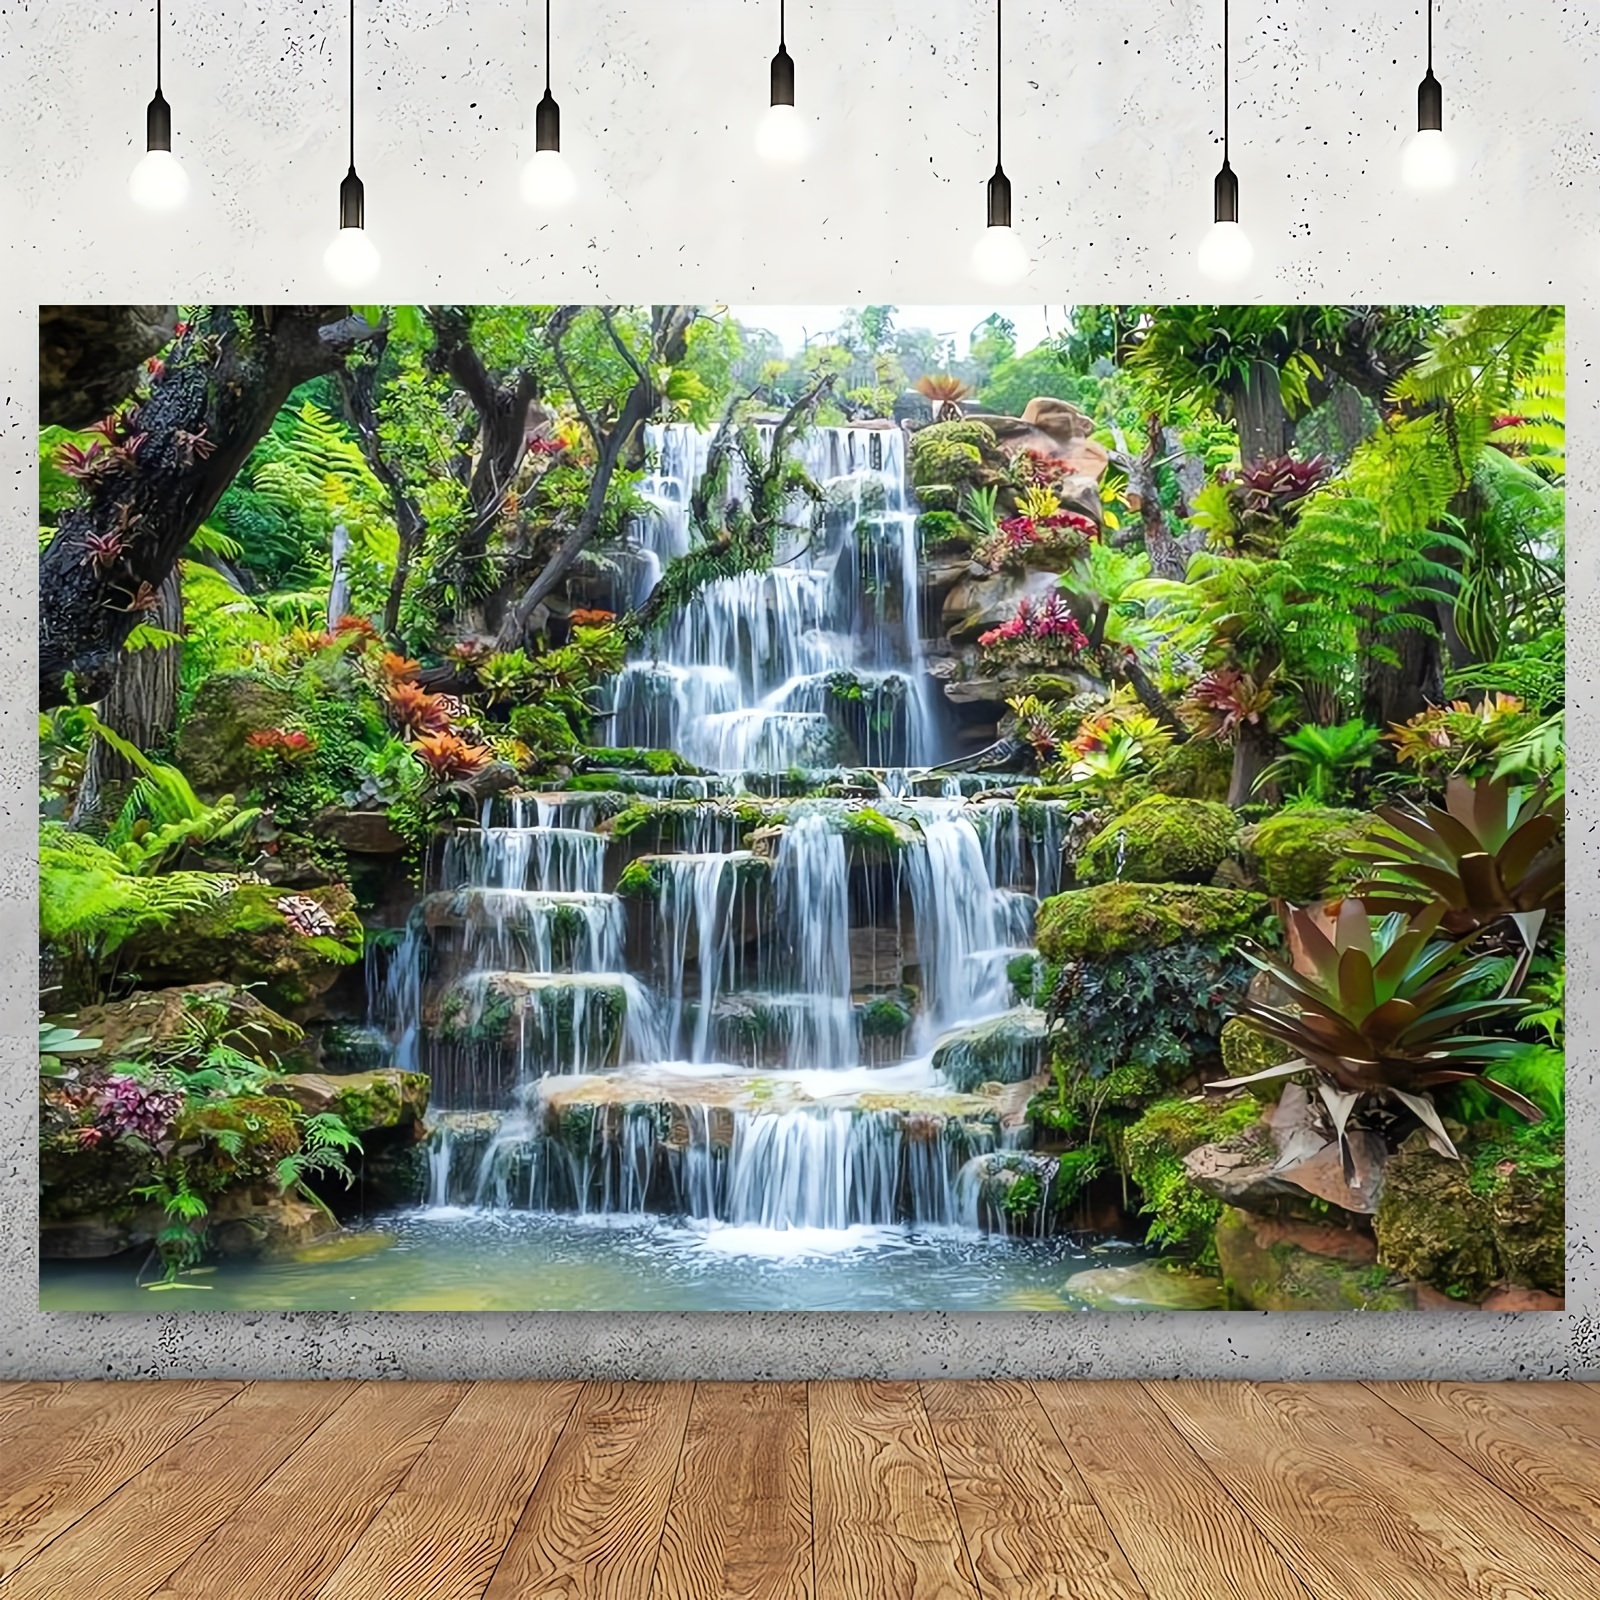 

1pc, 51×59inch/70.8×90.5inch, Fabric Garden Waterfall Backdrop Mountain Rocks Flowing Water Lake River Green Forest Trees Nature Background Home Wall Decor Photo Booth Shoot Studio Props